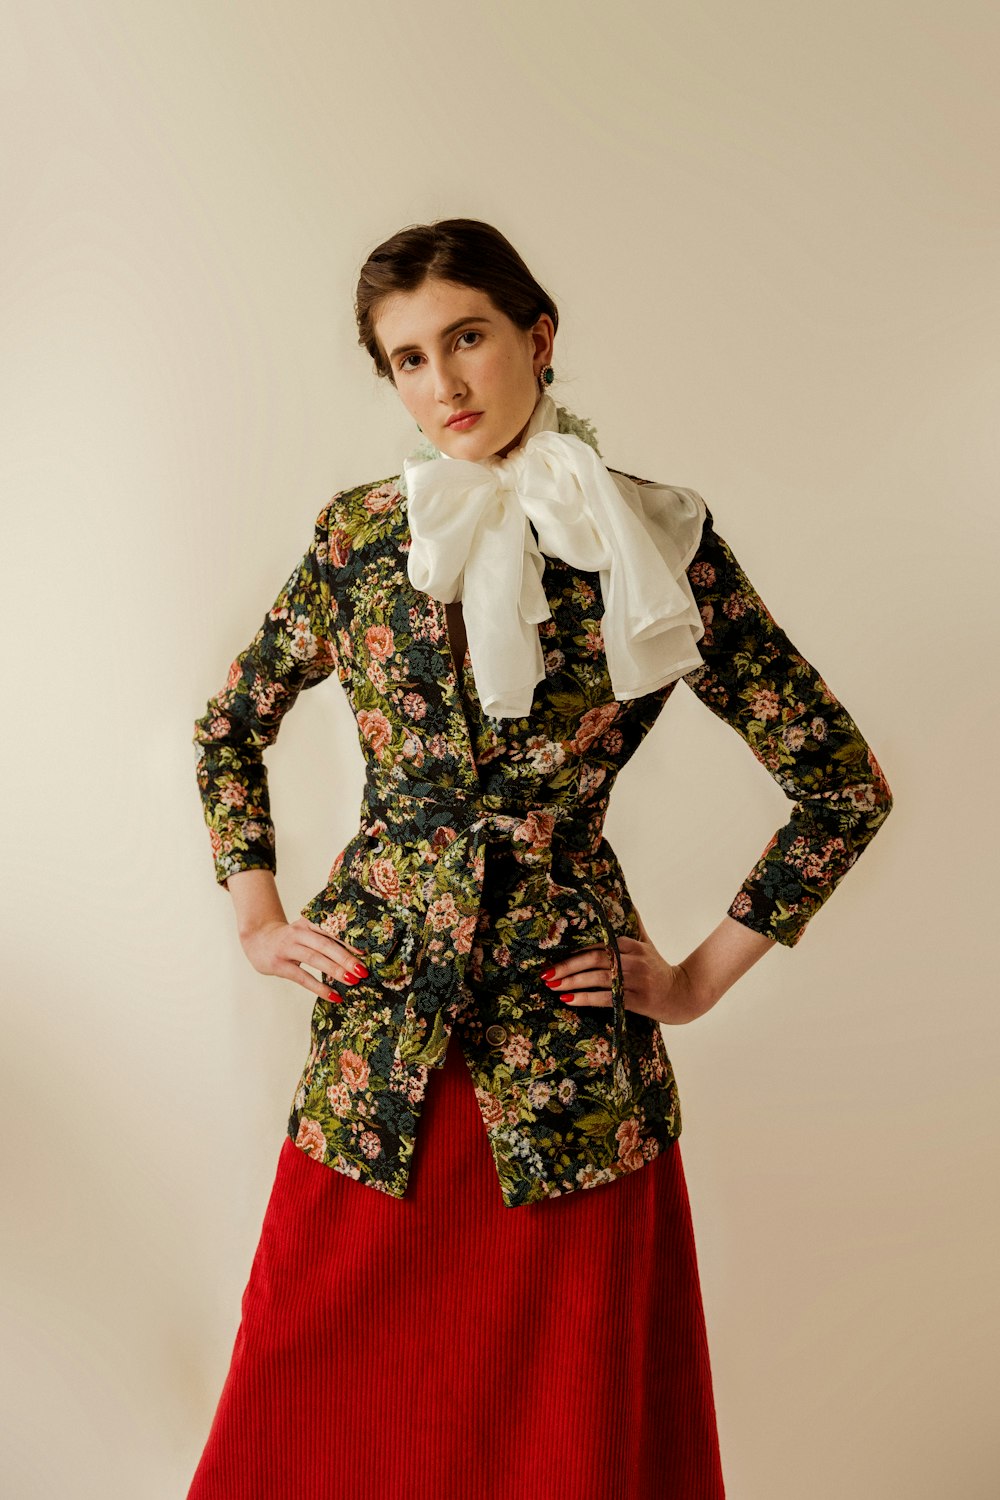 a woman in a floral jacket and red skirt